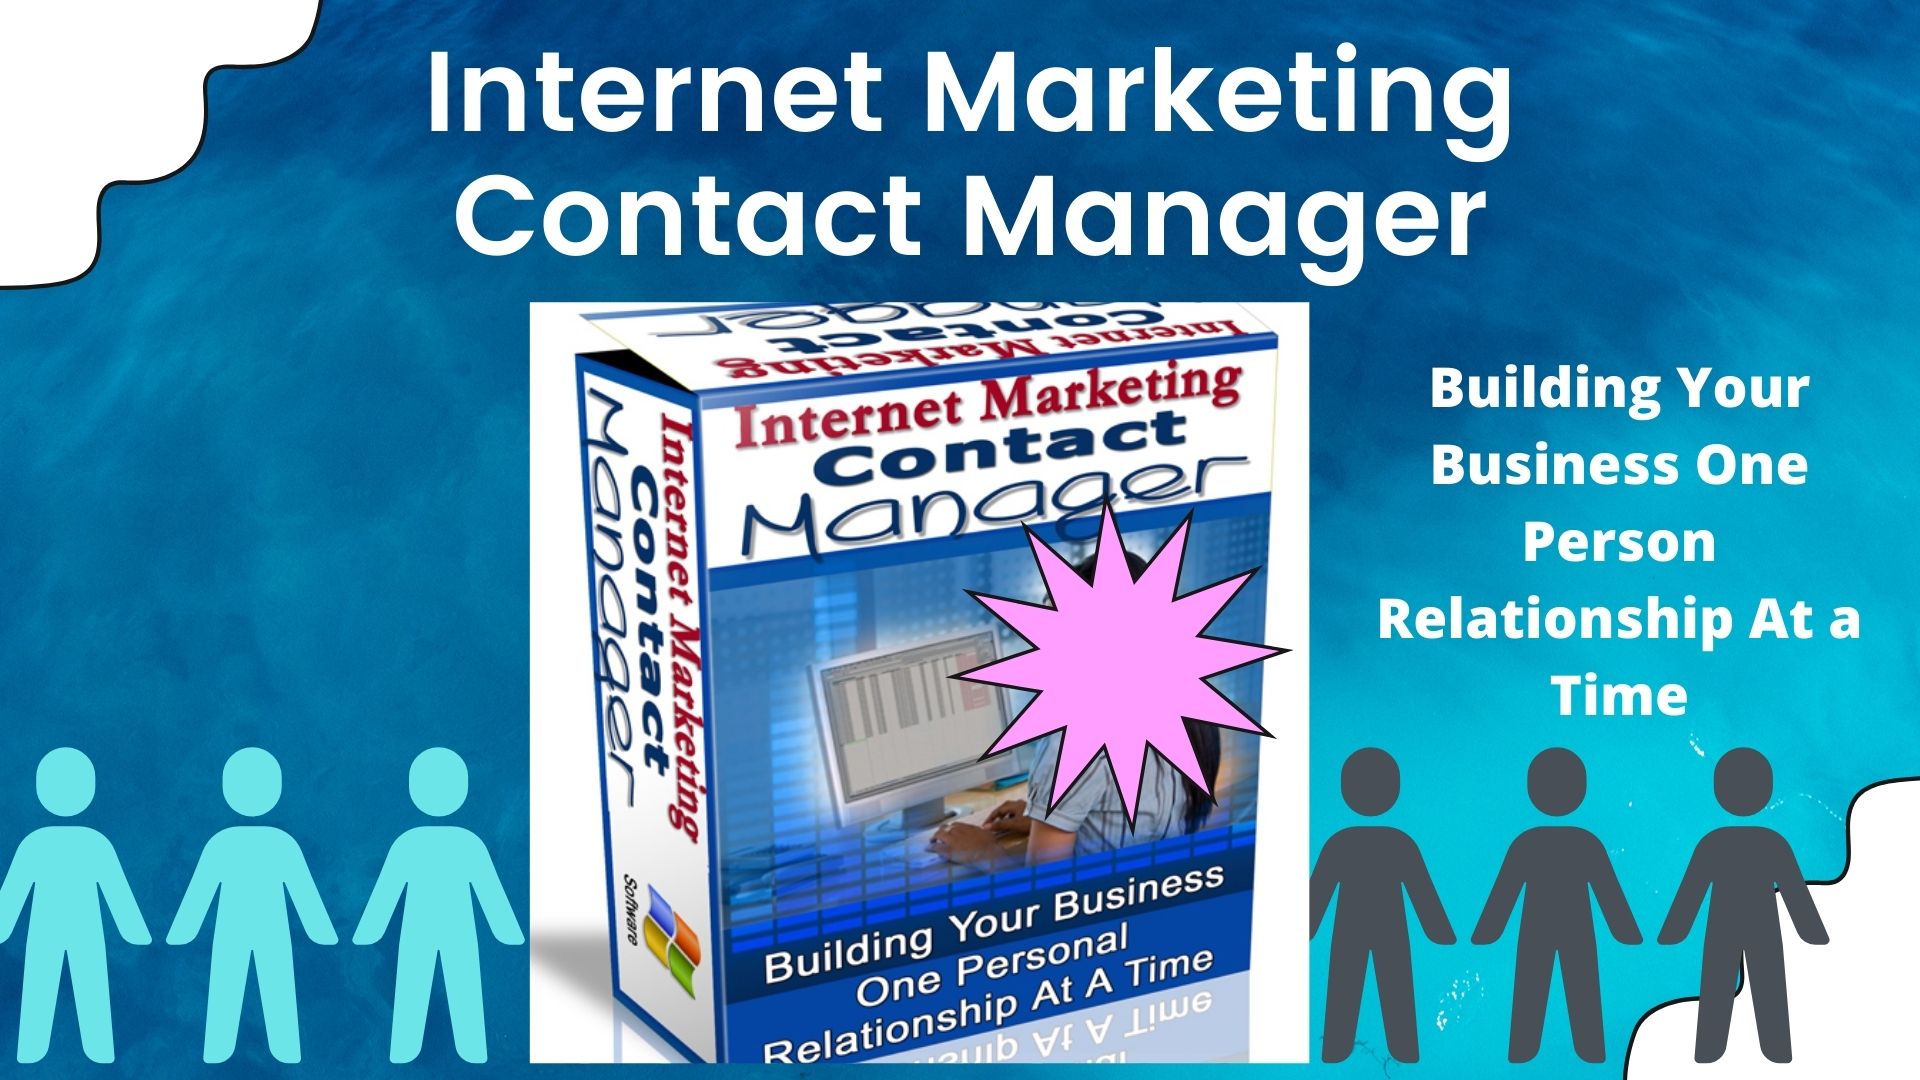 Internet Marketing Contact Manager